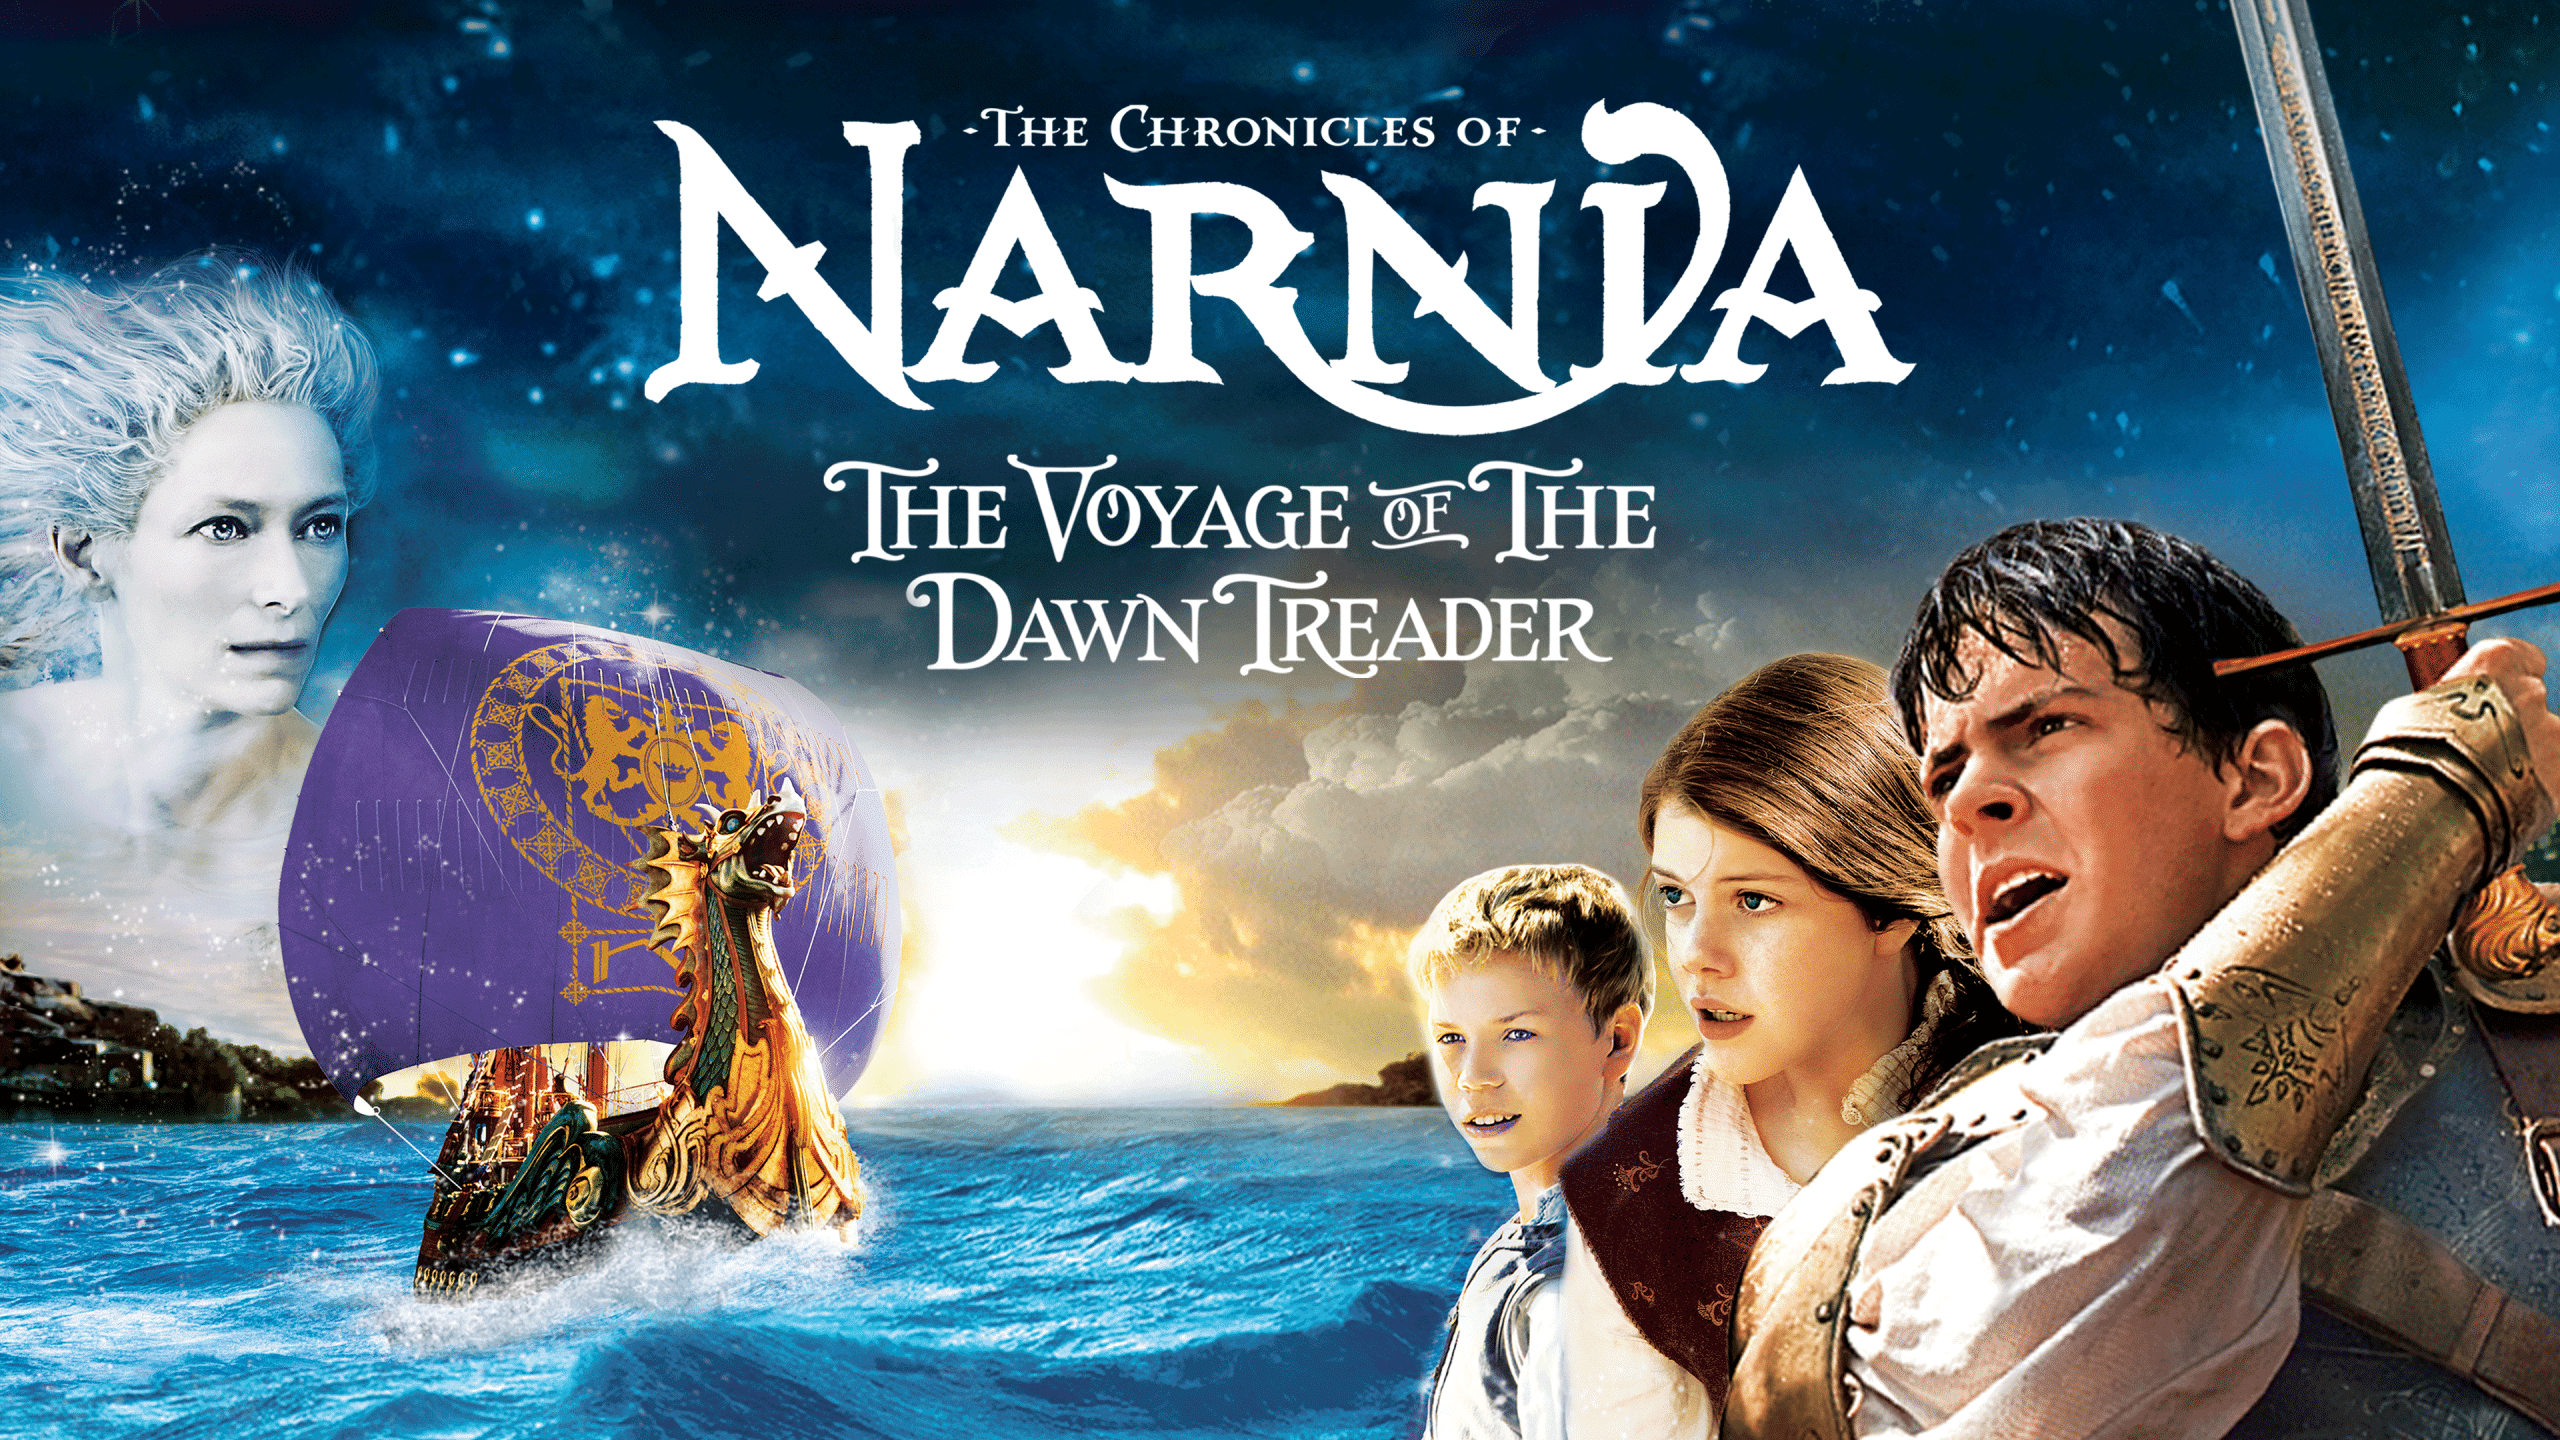 peter voyage of the dawn treader